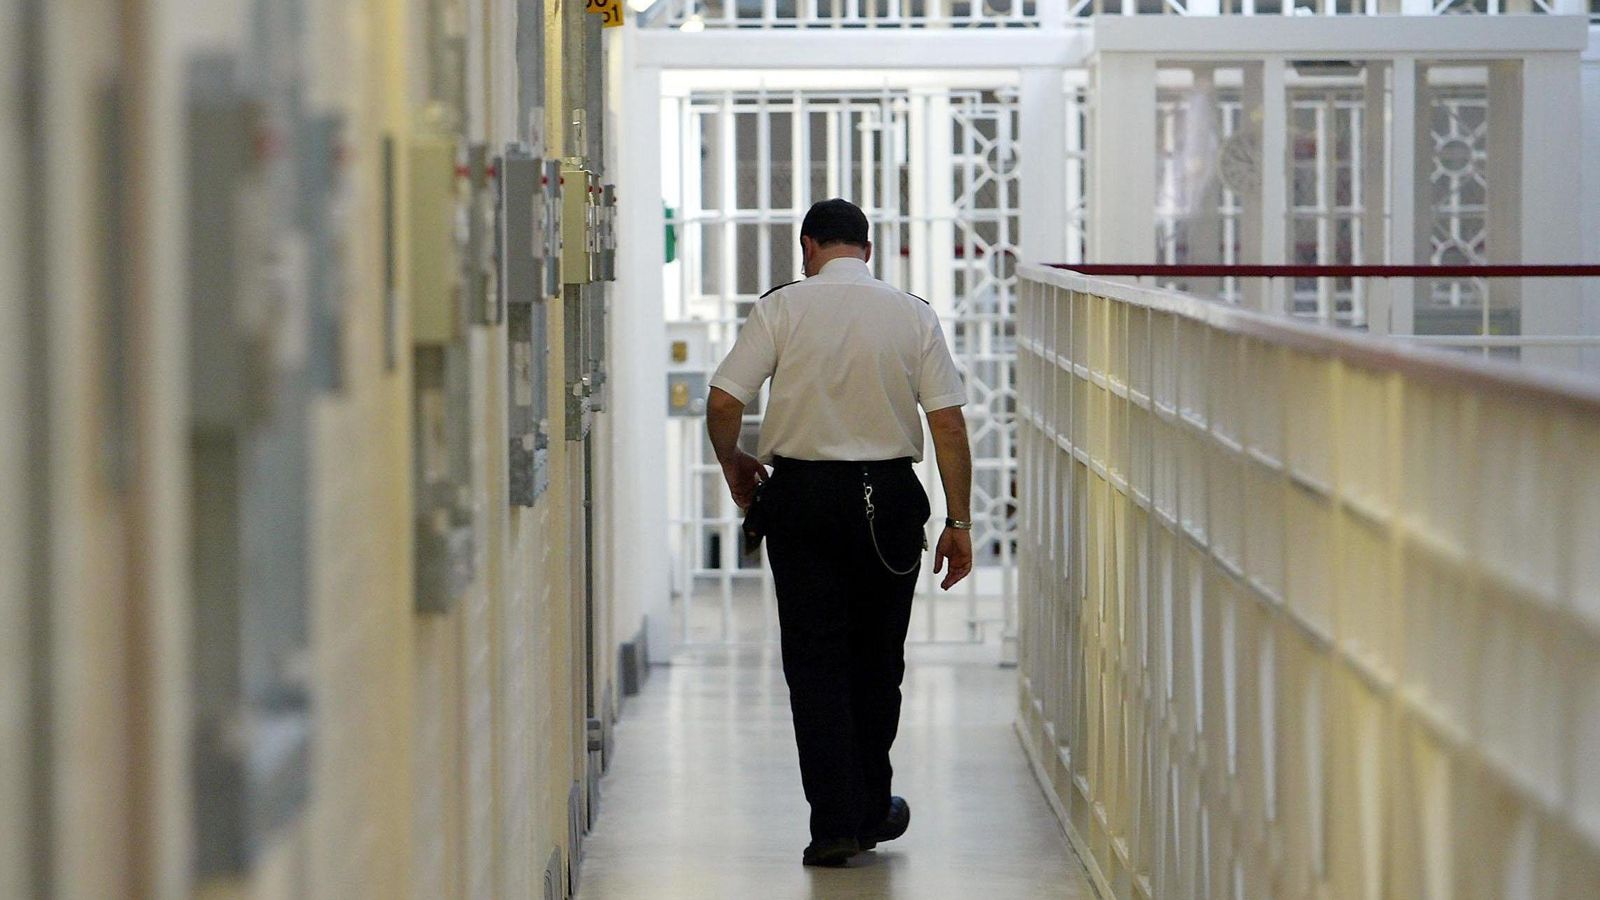 Government running out of prison places and has to ask police for 400 cells